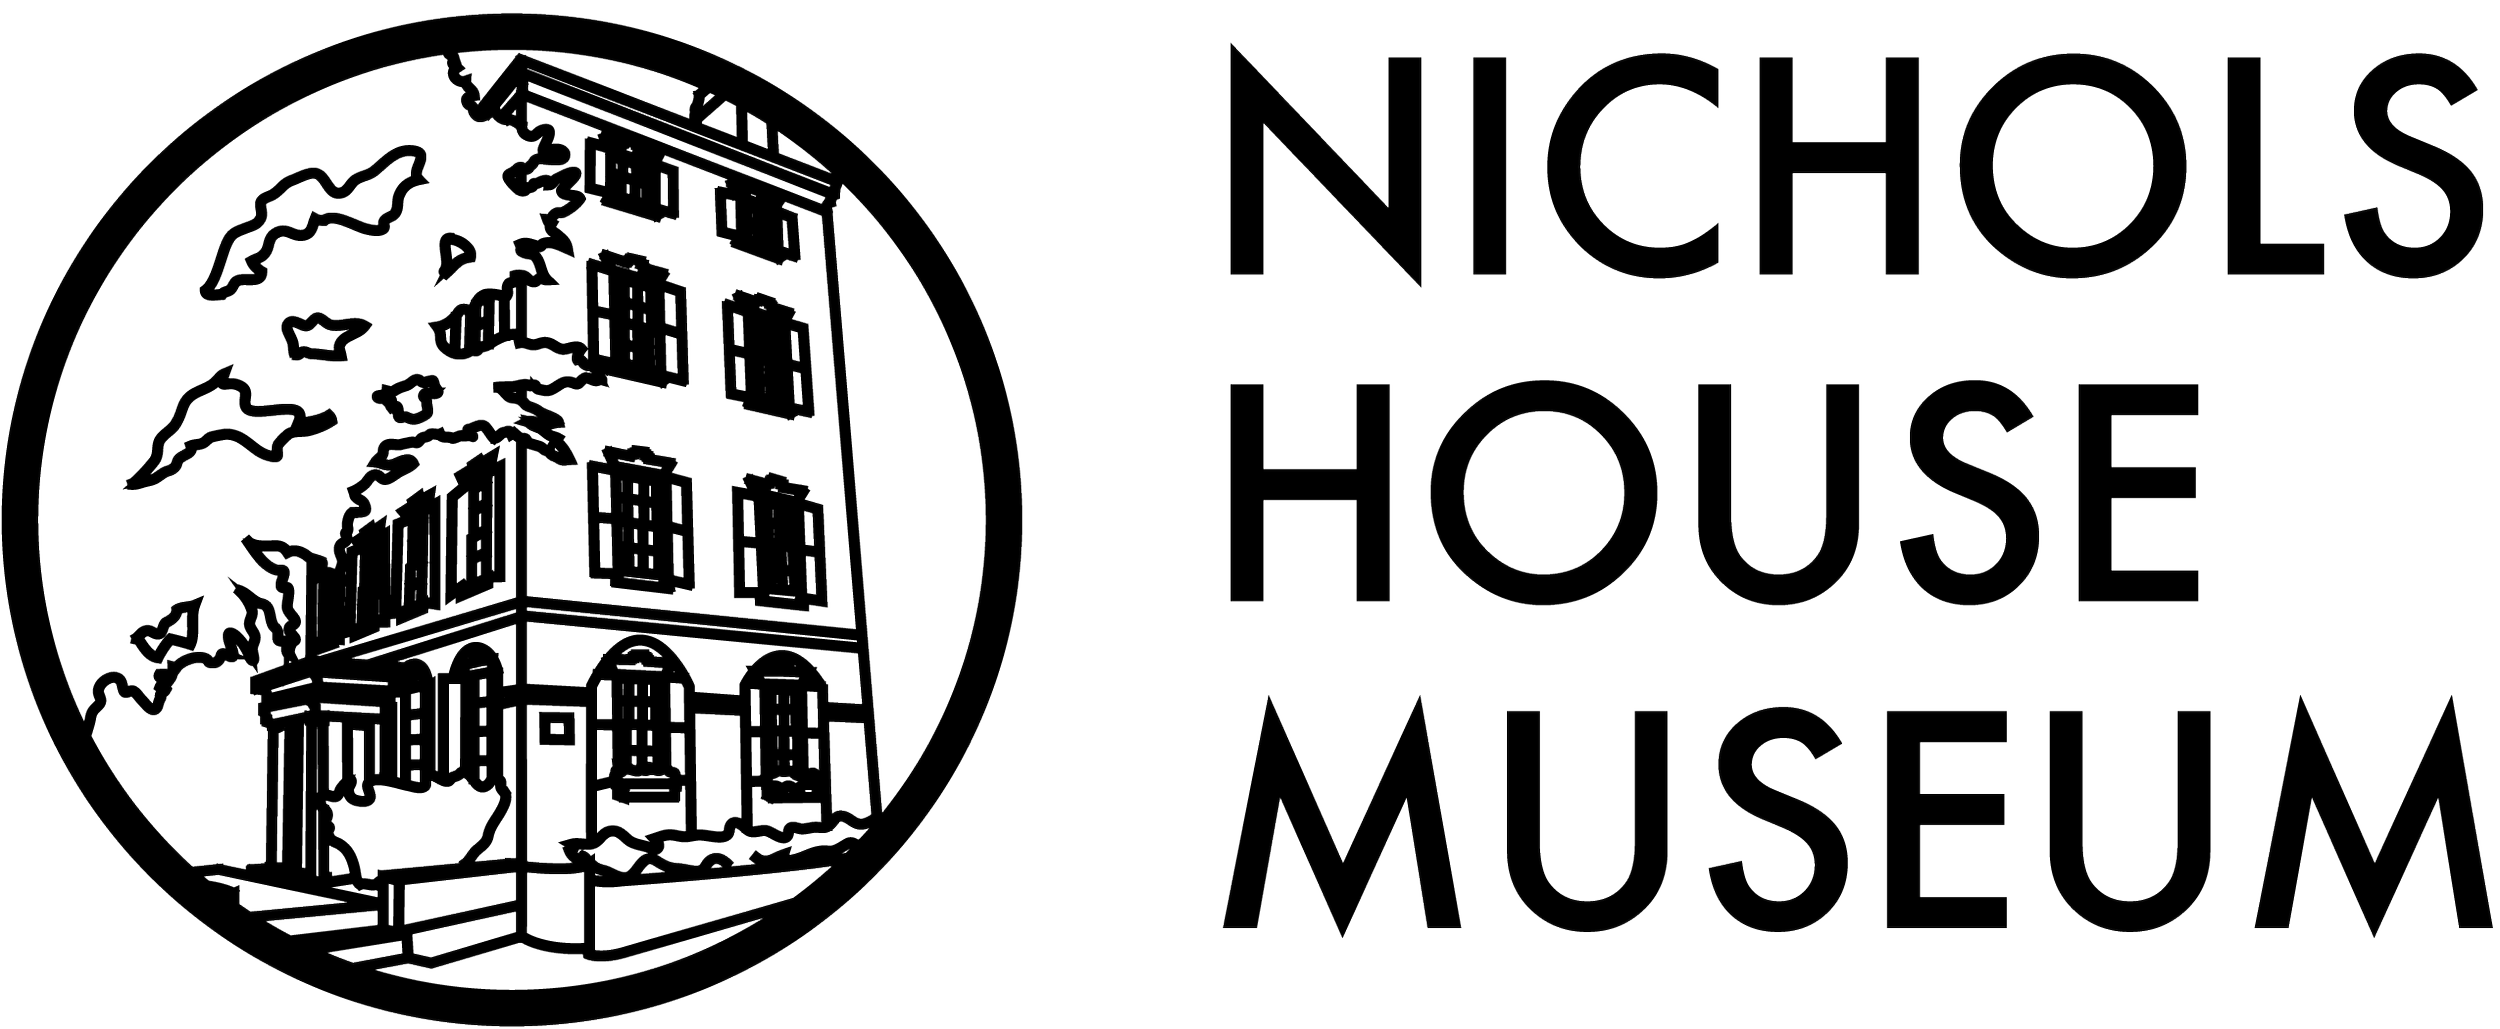 nhm-logo with text.png